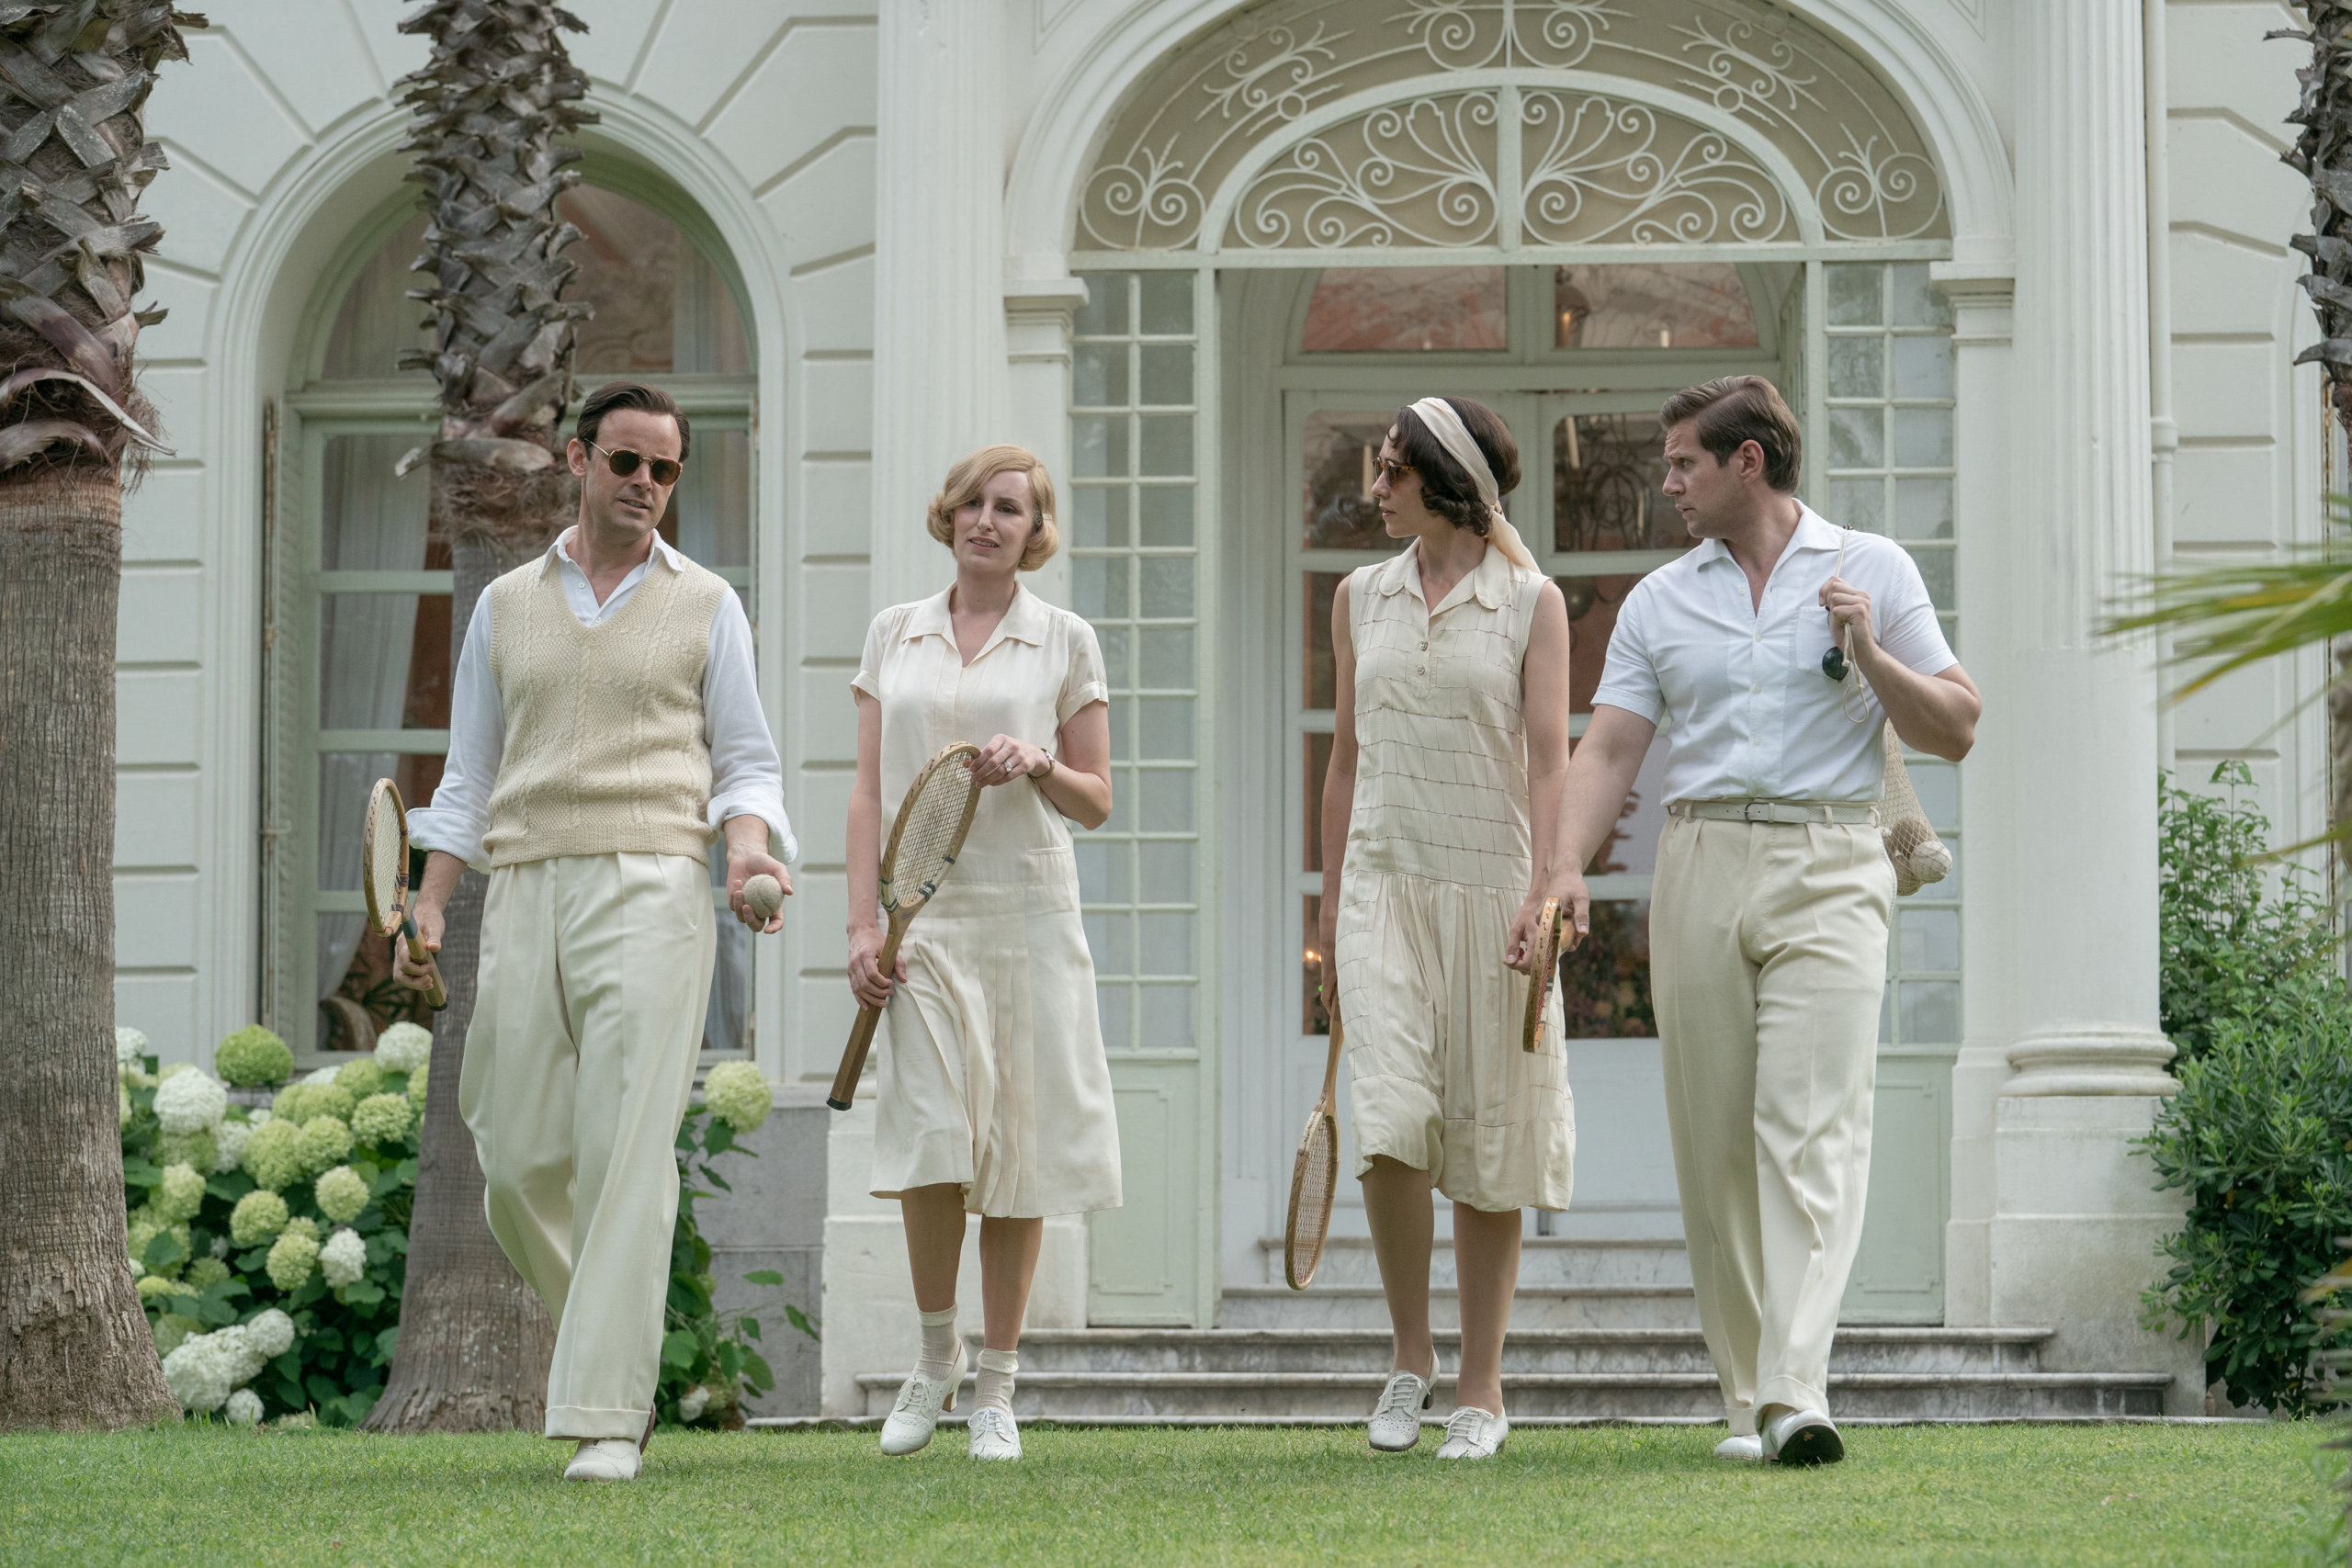 (Left to right) Harry Hadden-Paton stars as Bertie Pelham, Laura Carmichael as Lady Edith, Tuppence Middleton as Lucy Smith and Allen Leech as Tom Branson in "Downton Abbey: A New Era"